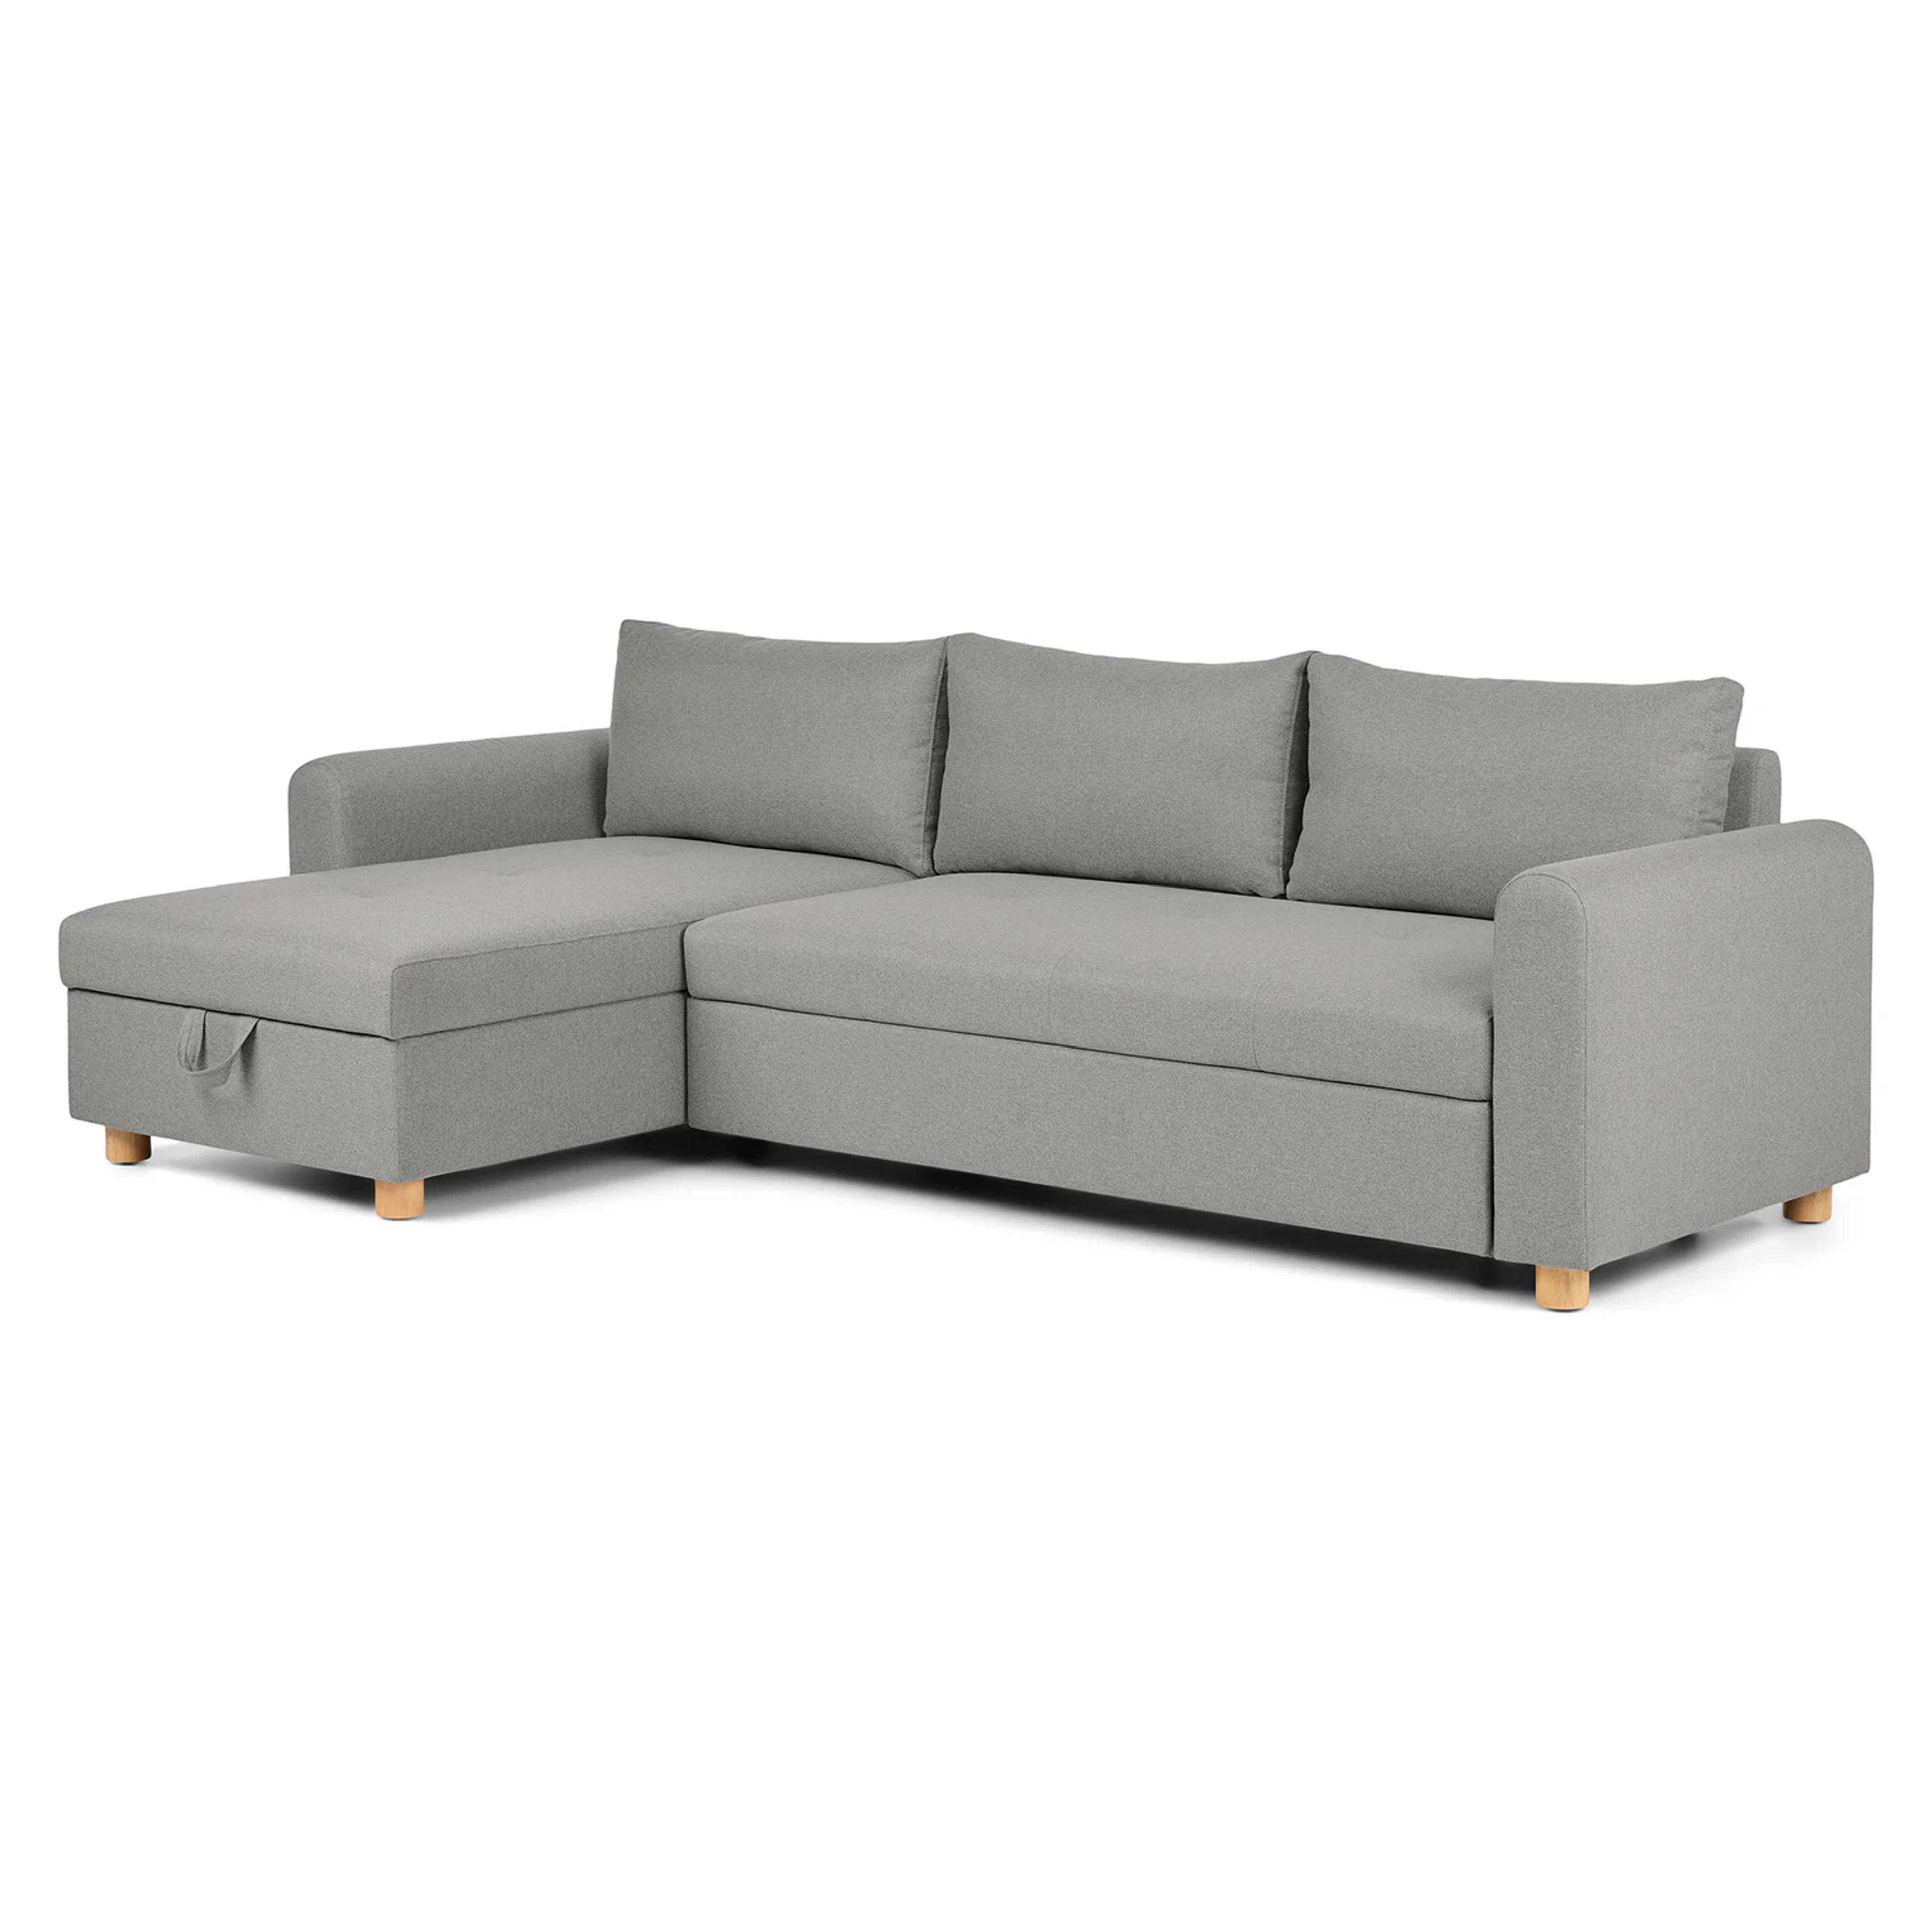 Nordby Pep Gray Reversible Sleeper Sectional | Article